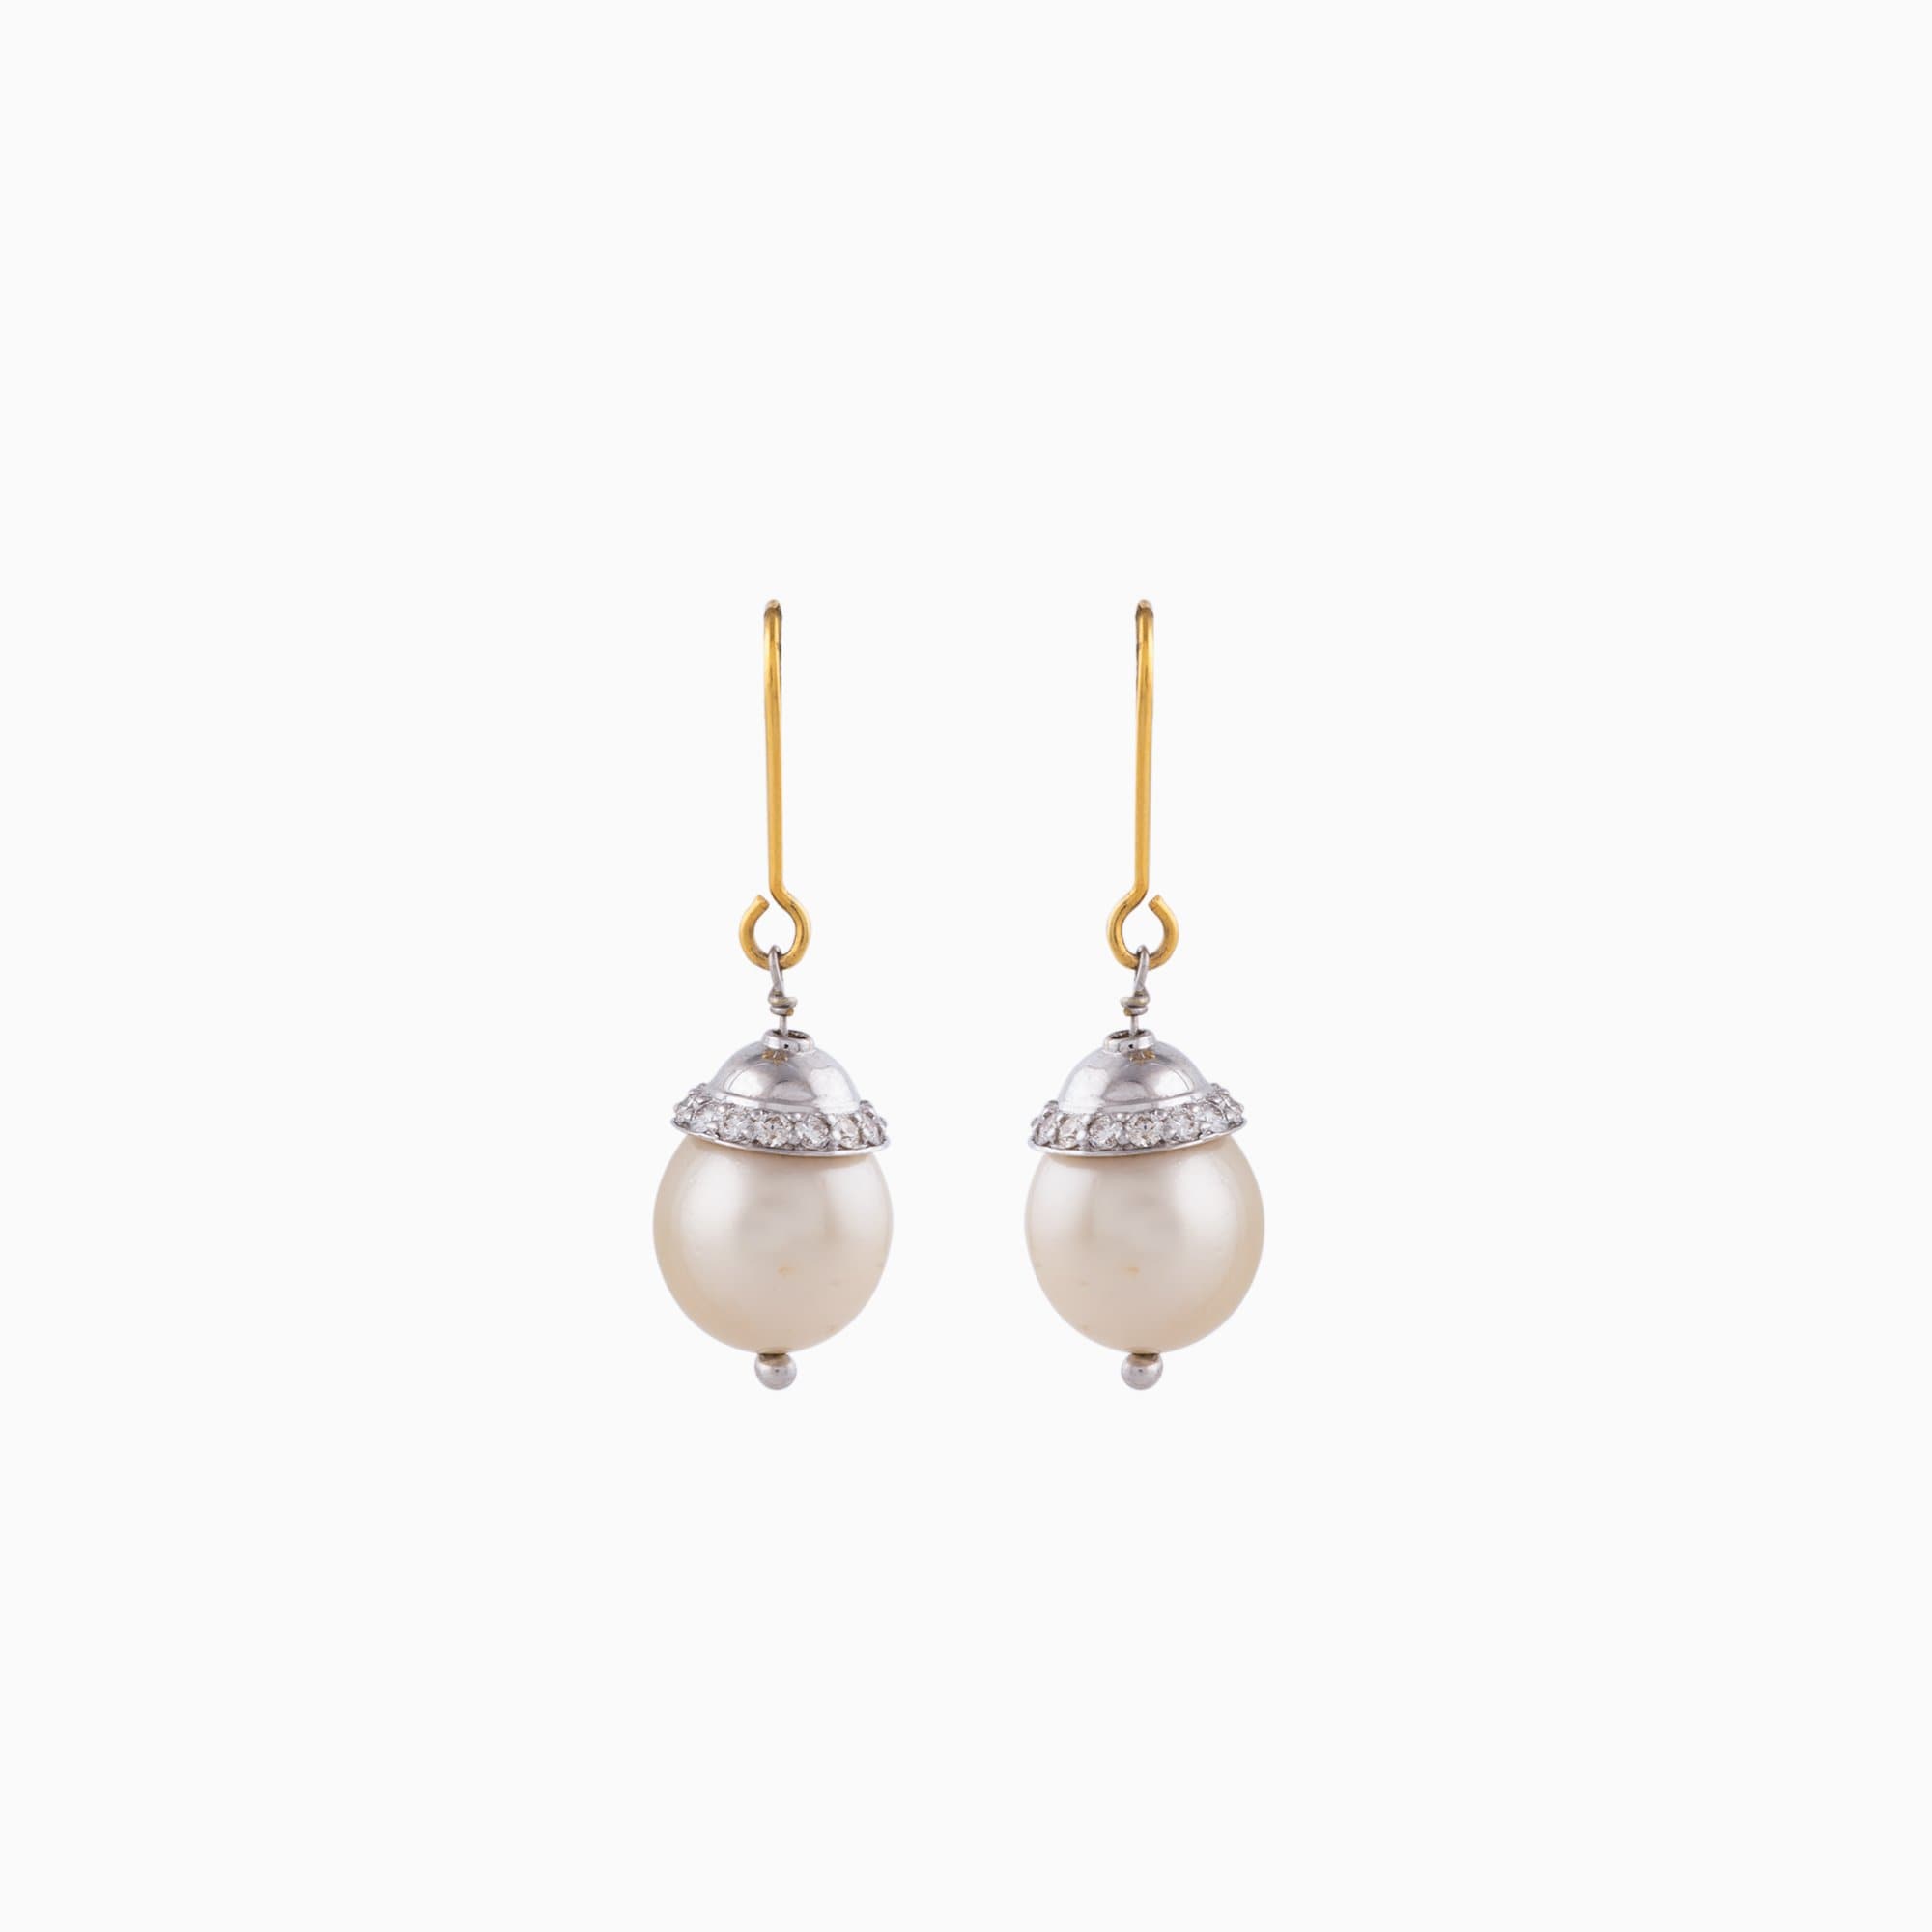 Earring pair with Round Cut Diamond and S.S. Pearls with Gold Aakada-WDN063